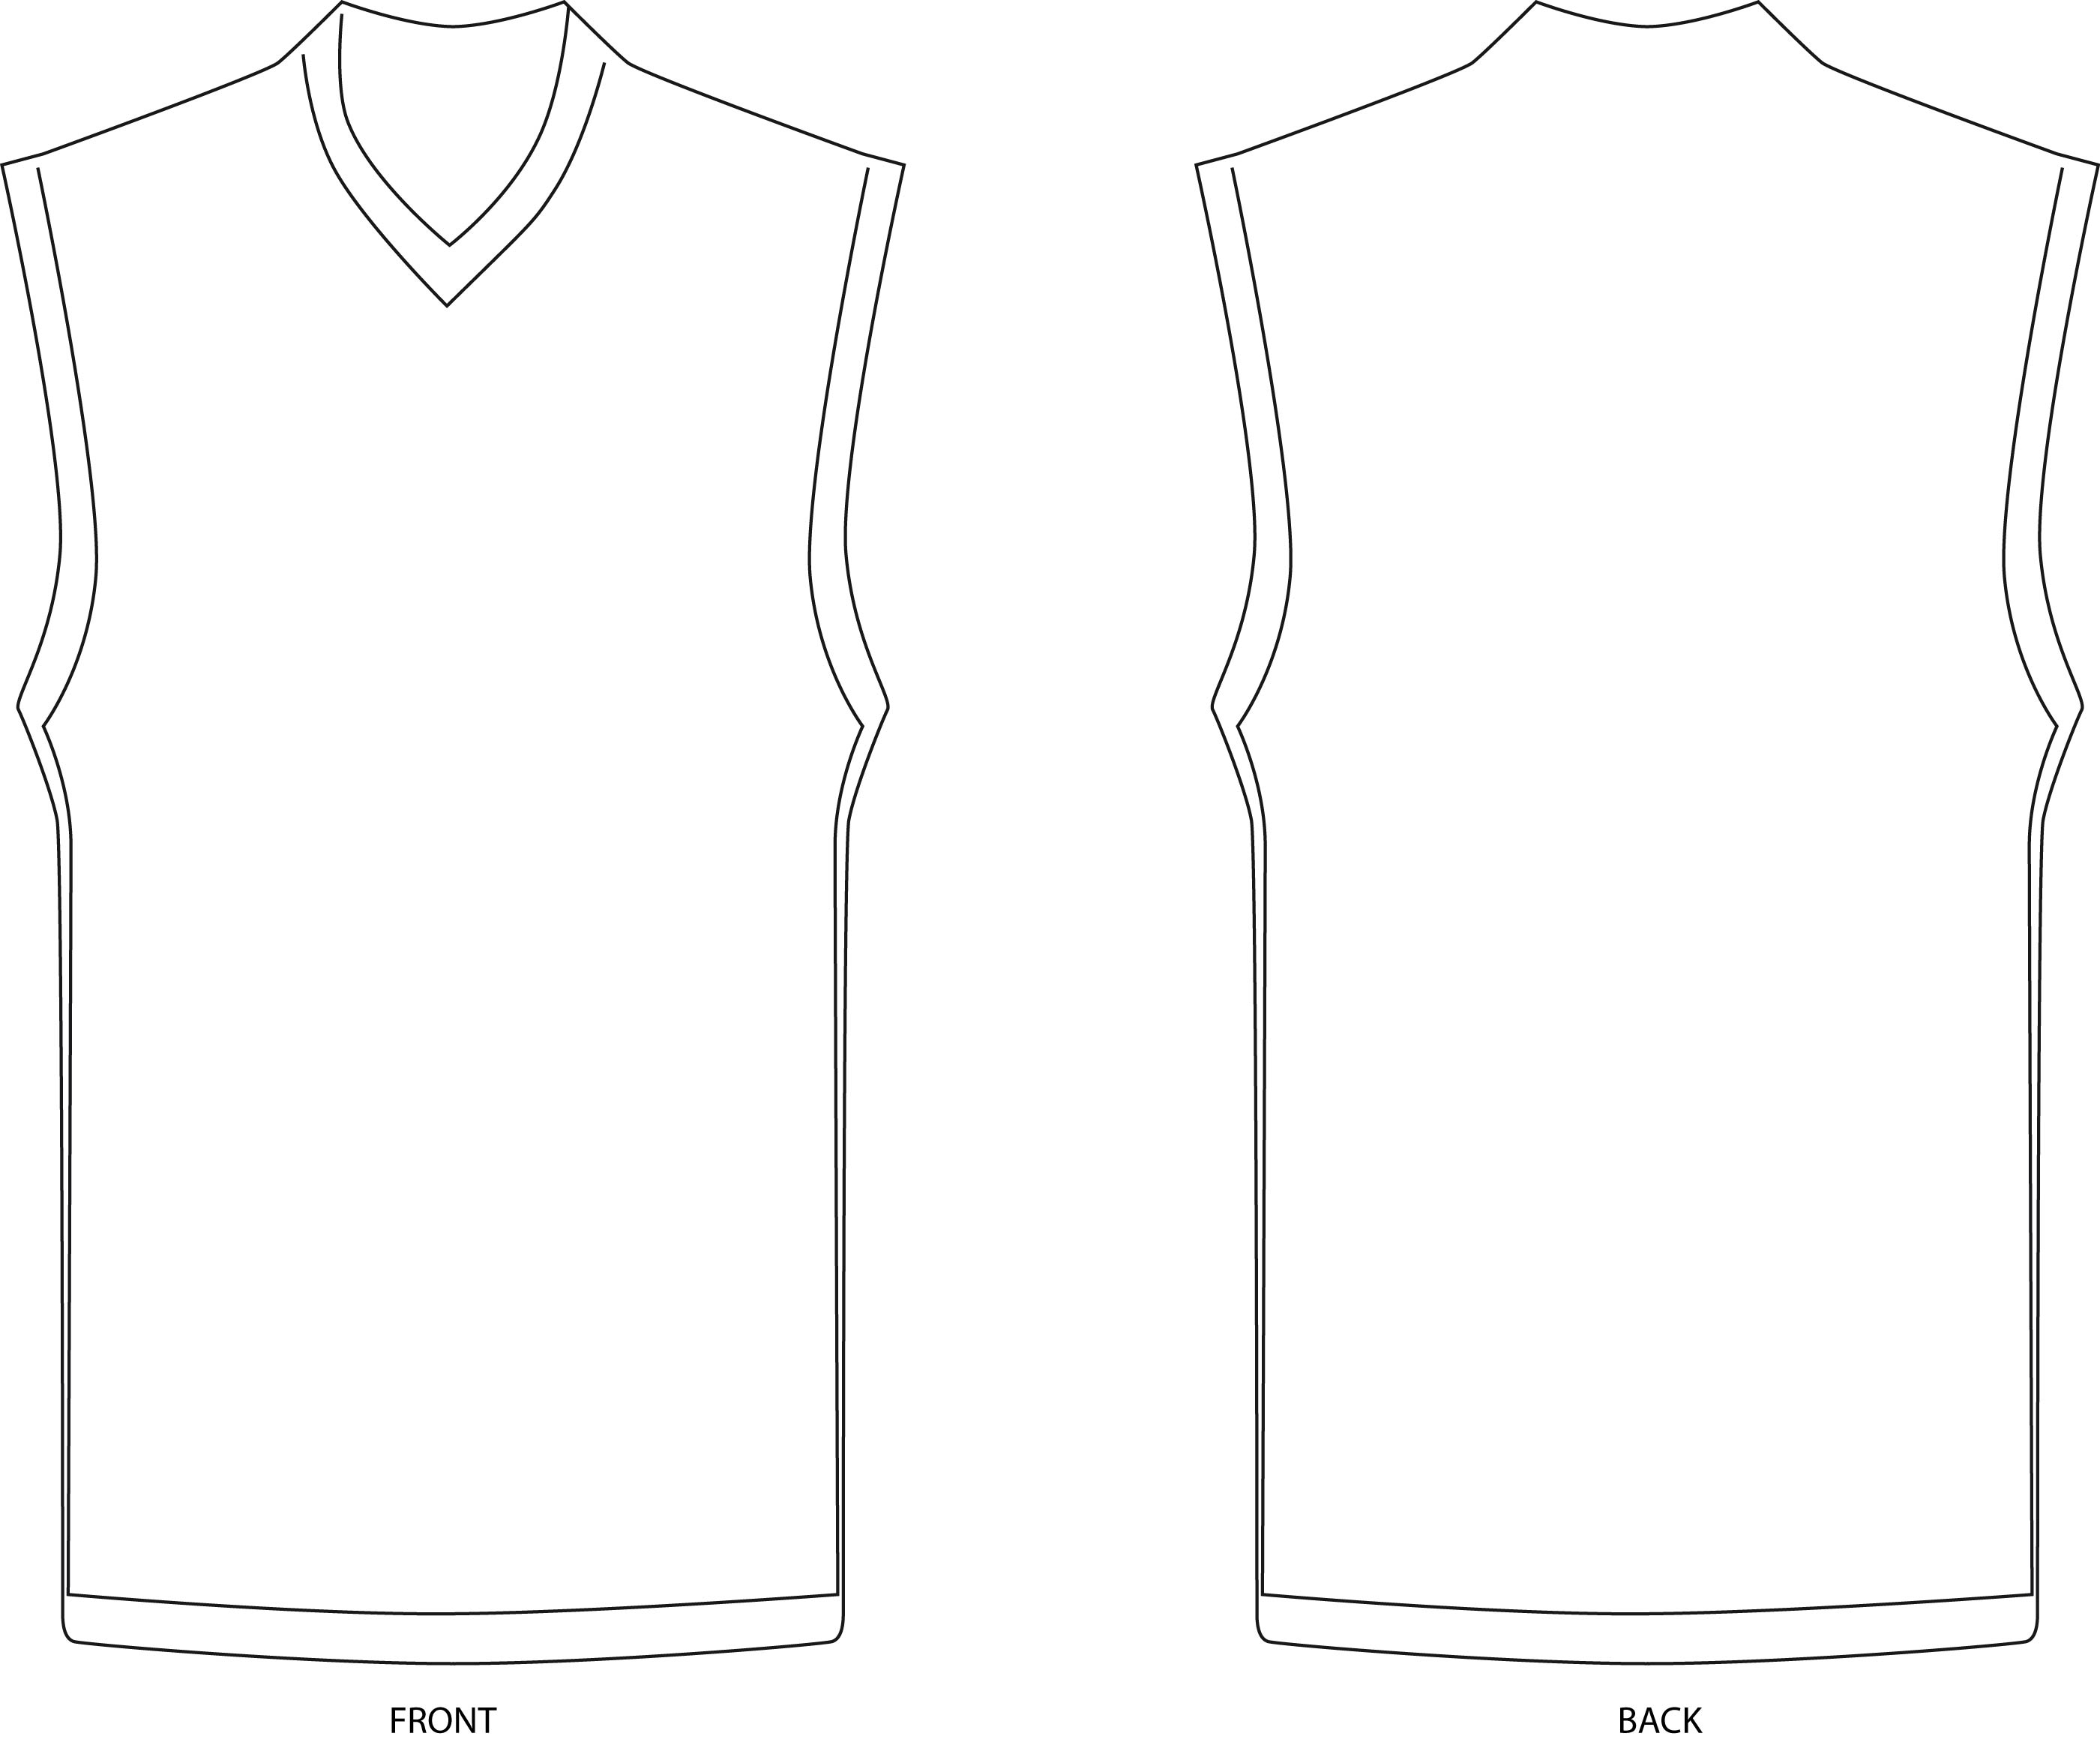 Download Free Basketball Jersey Template, Download Free Clip Art ...